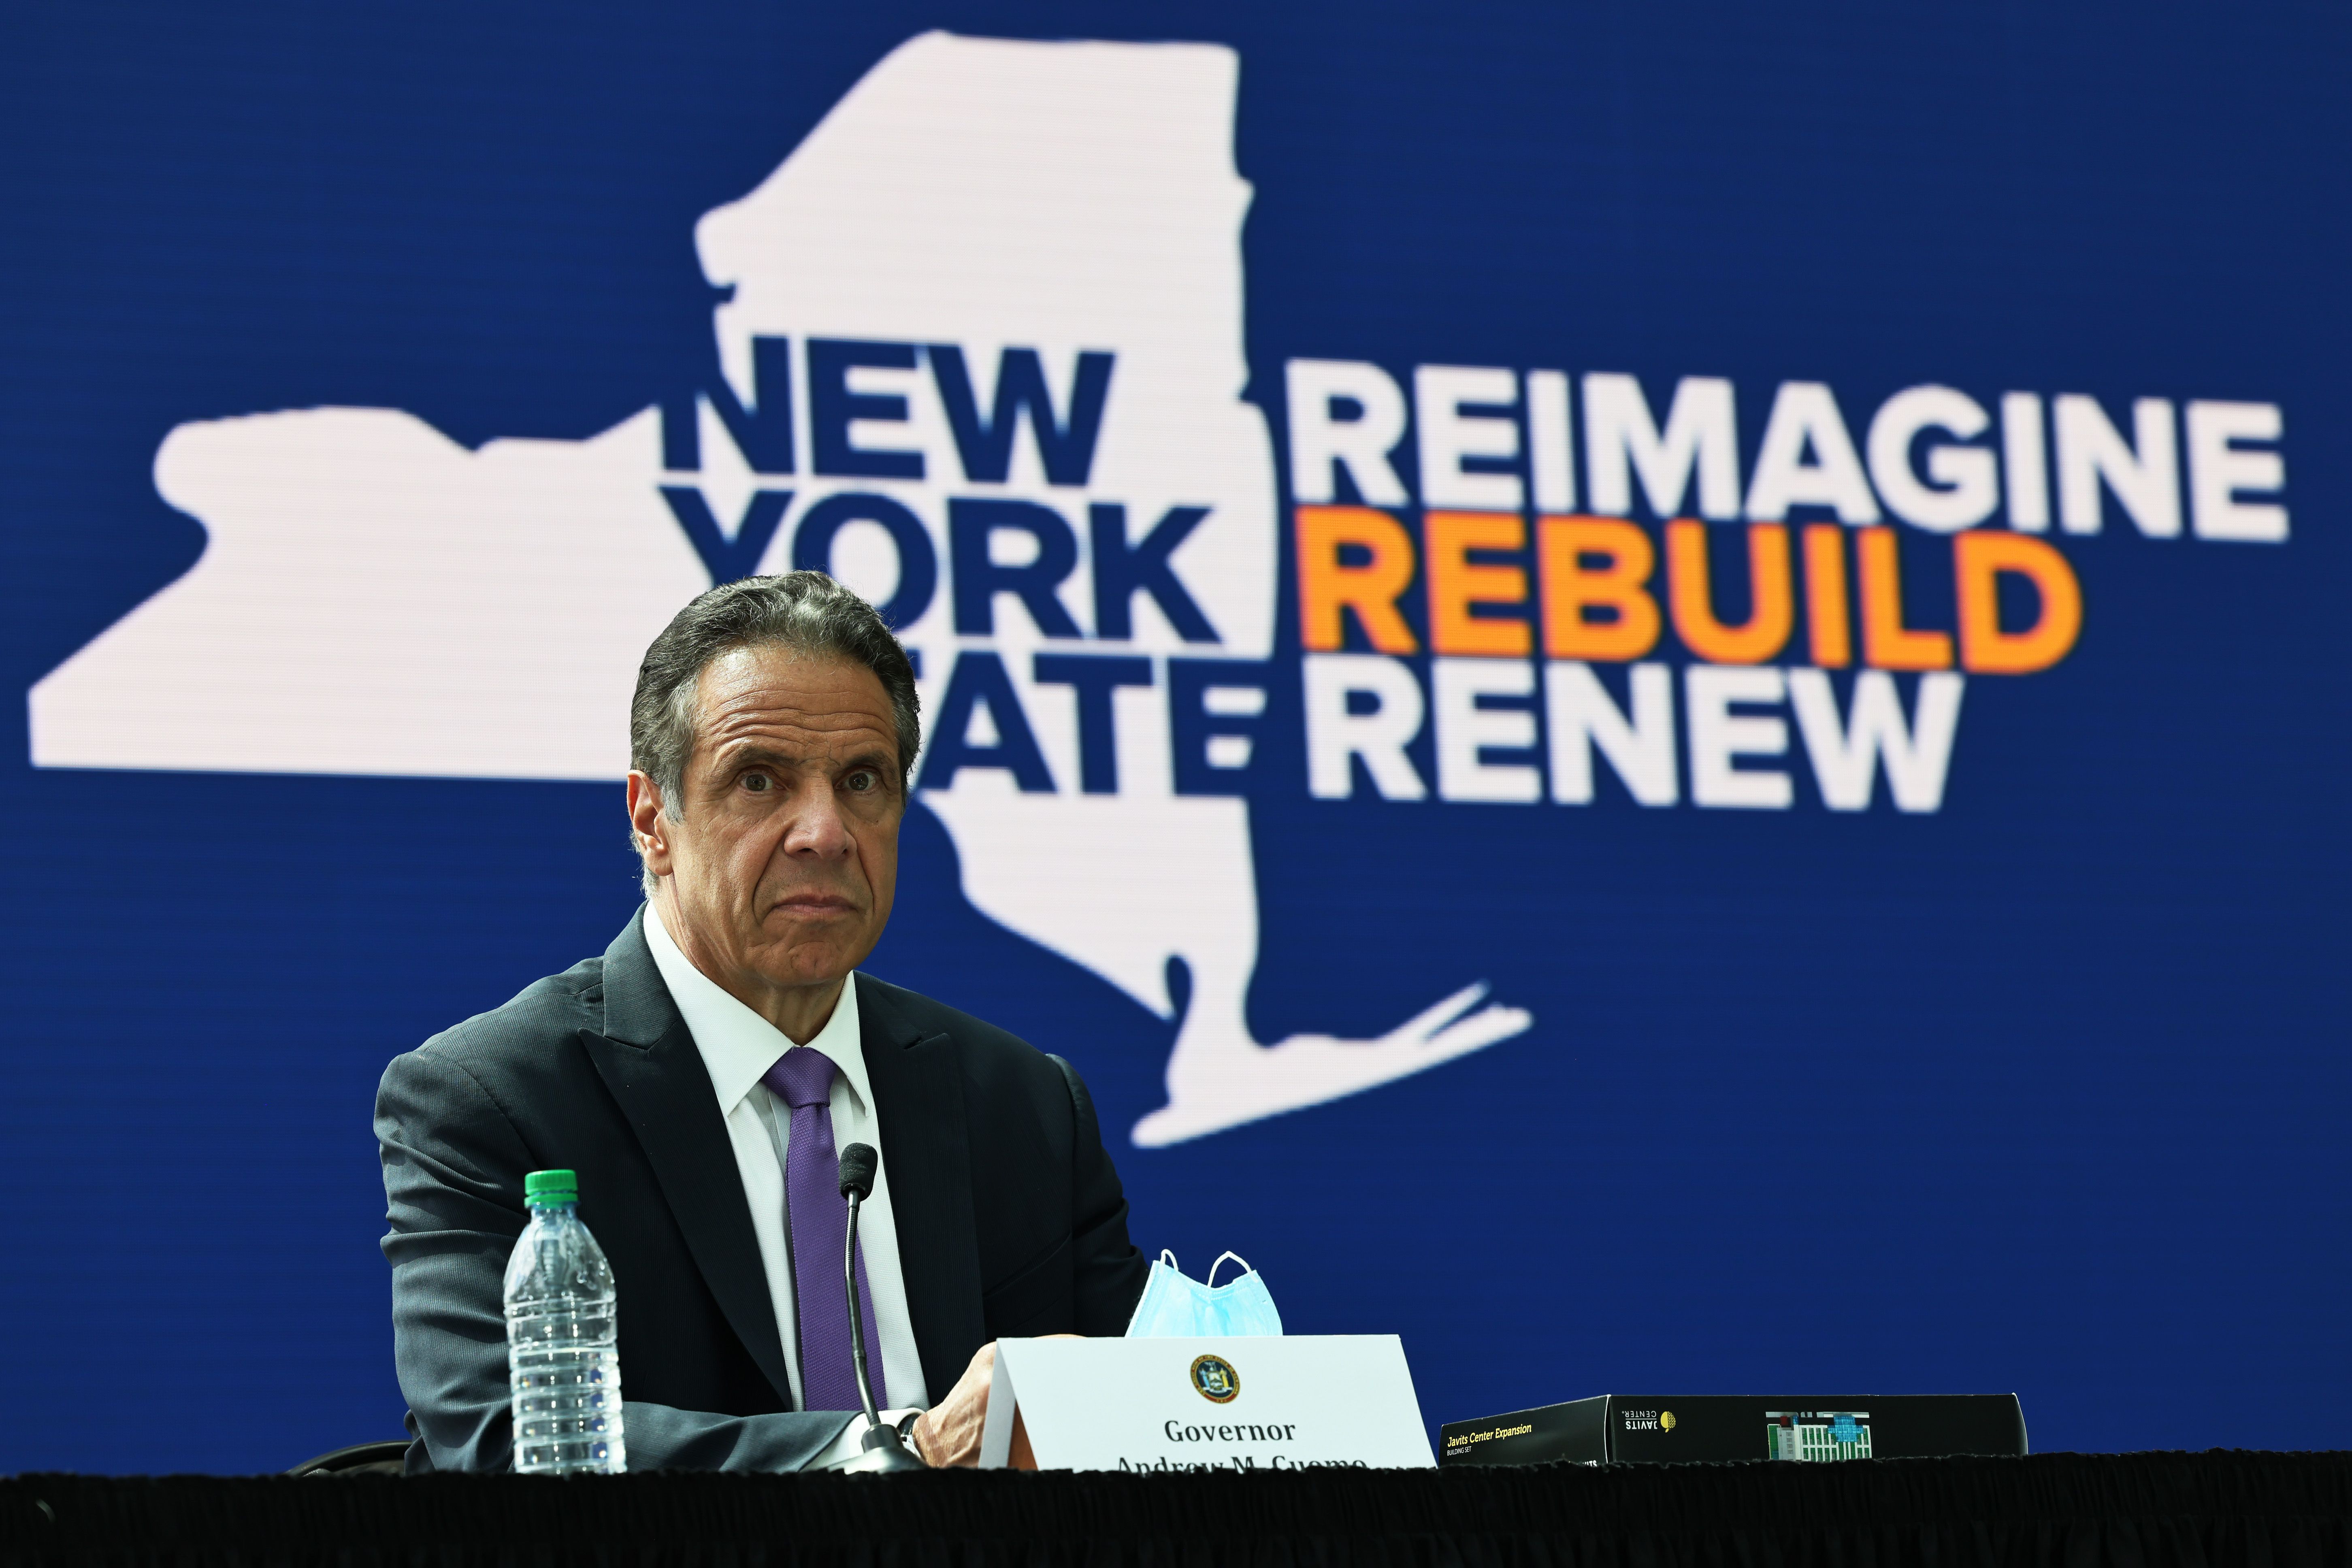 Andrew Cuomo appears at a conference.